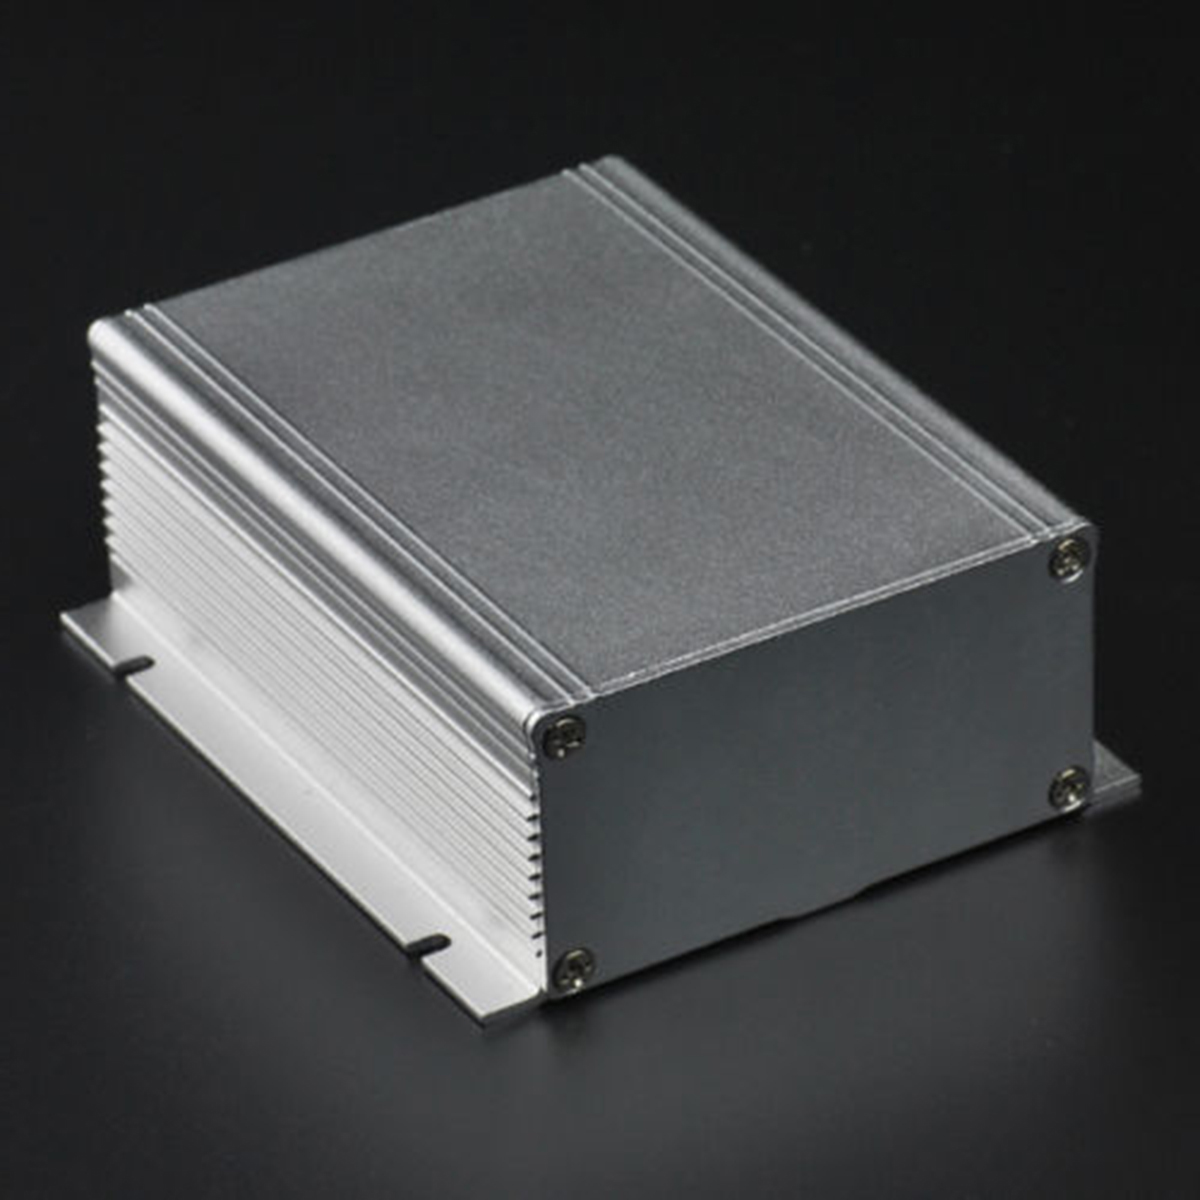 Extruded Aluminum Electronic Power PCB Instrument Box Case Project DIY 100*88*39 